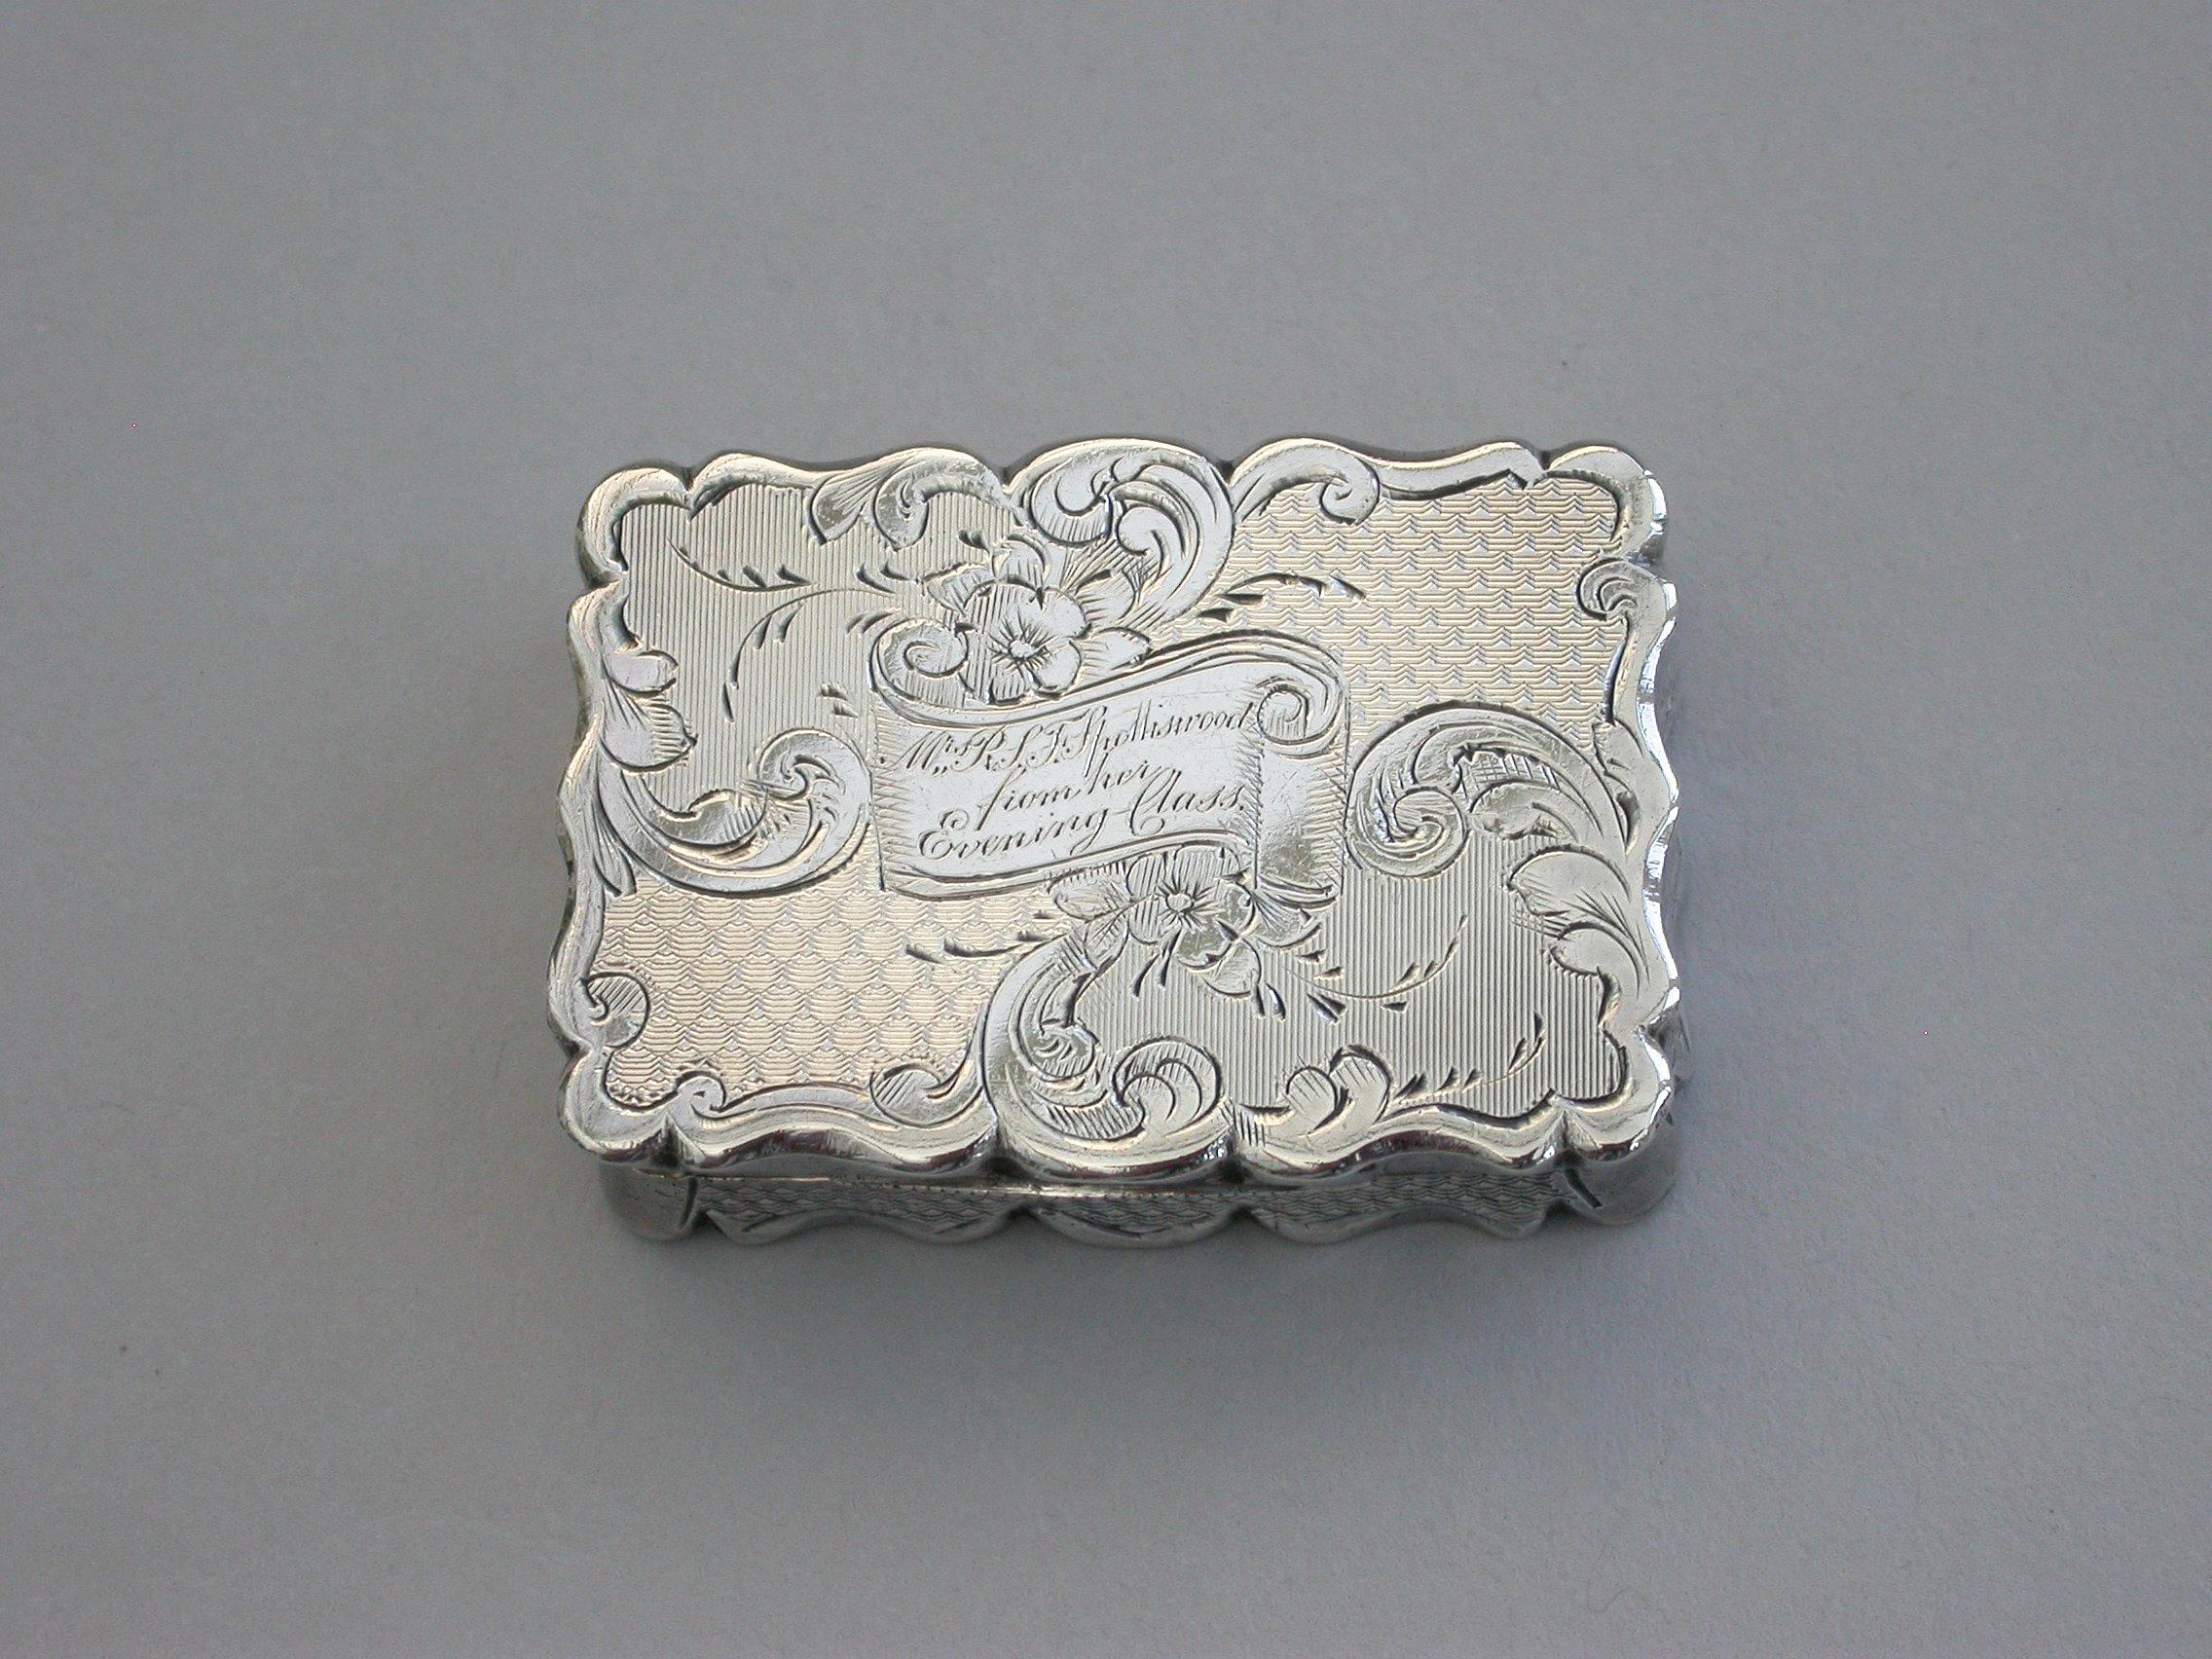 A charming and fine quality Victorian silver Vinaigrette of rectangular form with scalloped edges and all-over decoration of engine turned panels separated by engraved scrolls and flowers. The cover with central cartouche formed as an open scroll